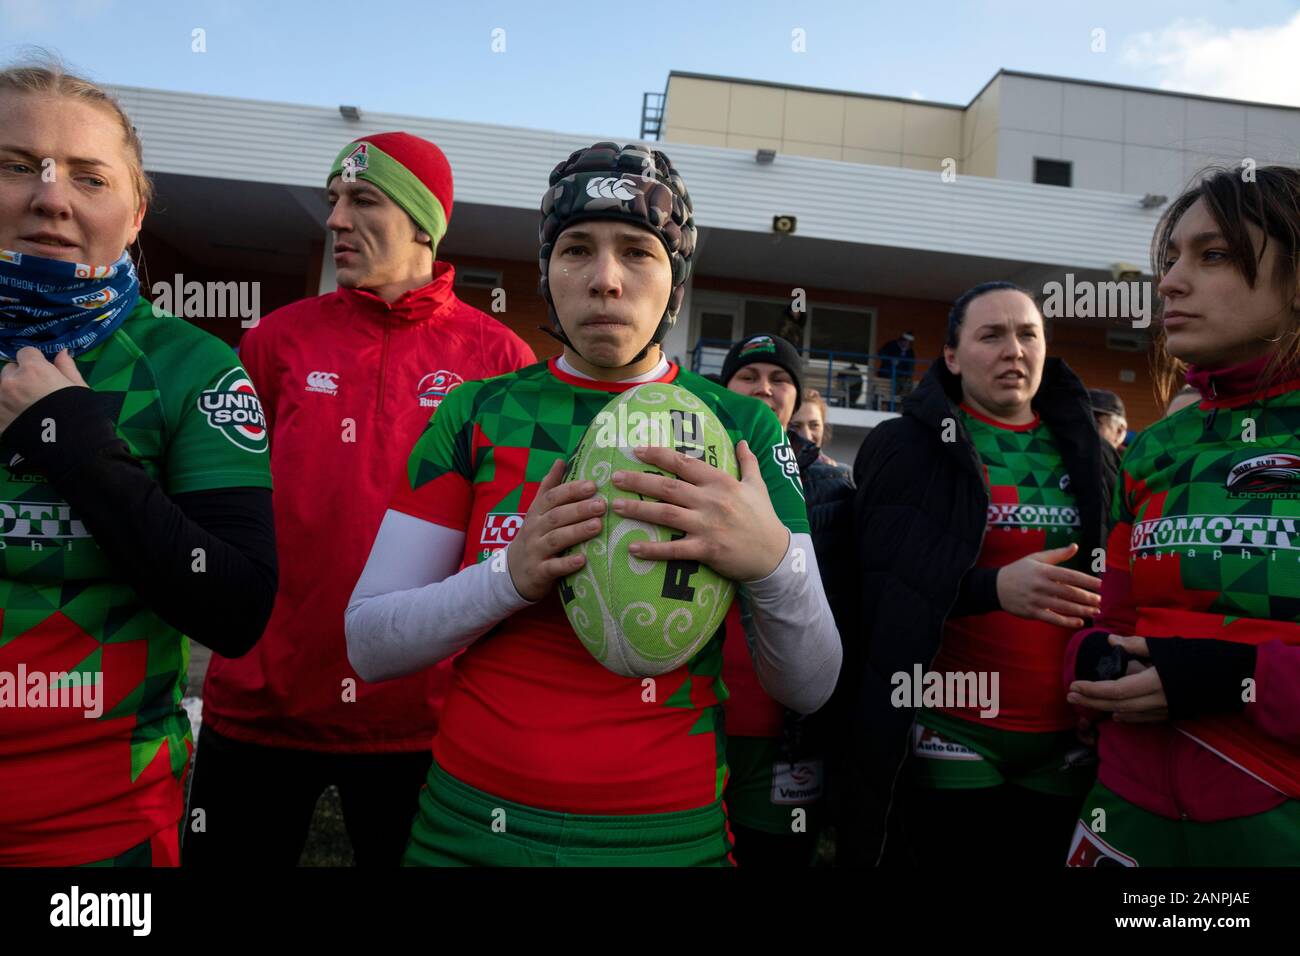 Moscow, Russia. 18th of January, 2020 The Lokomotiv women's Rugby team is tuned to play before the start the match during 9th 'Snow Rugby' tournament in Moscow, Russia. Snow rugby plays during the winter months and it has been played in extremely cold conditions Stock Photo